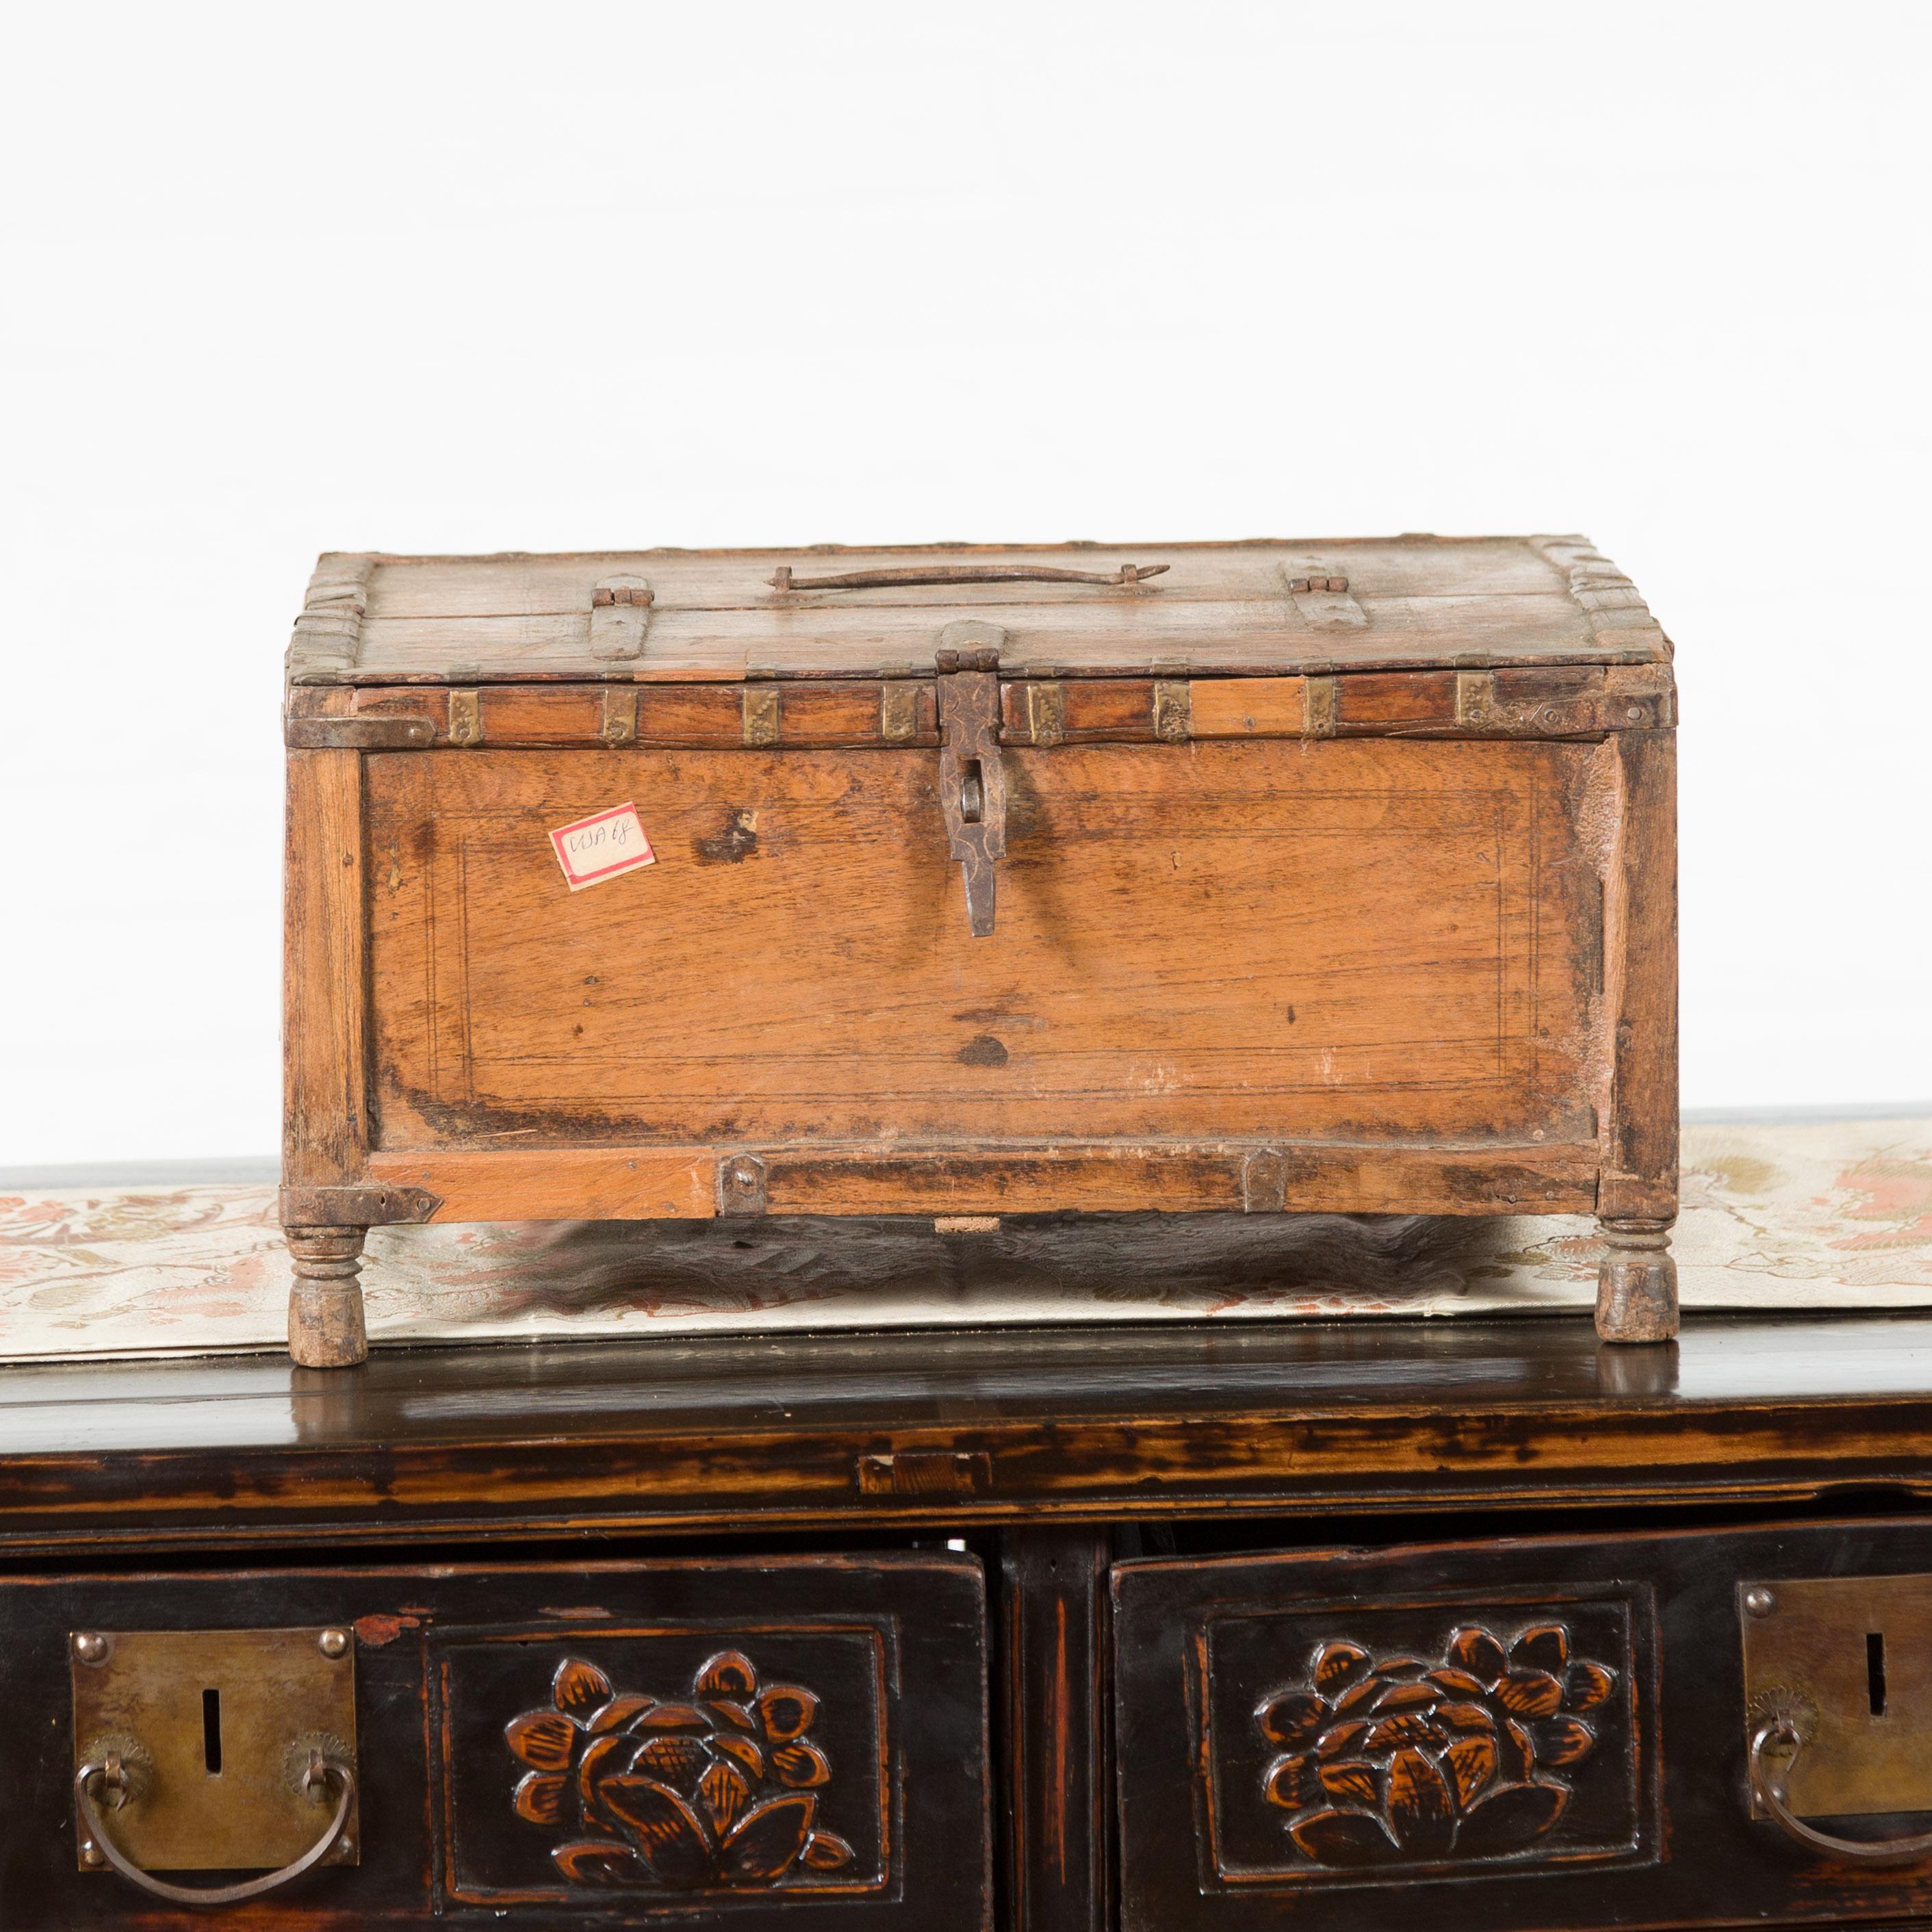 An Indian rustic wooden box from the 19th century, with nicely weathered appearance, iron details and incised motifs. Created in India during the 19th century, this wooden box features a rectangular lid adorned with concentric circles, half opening